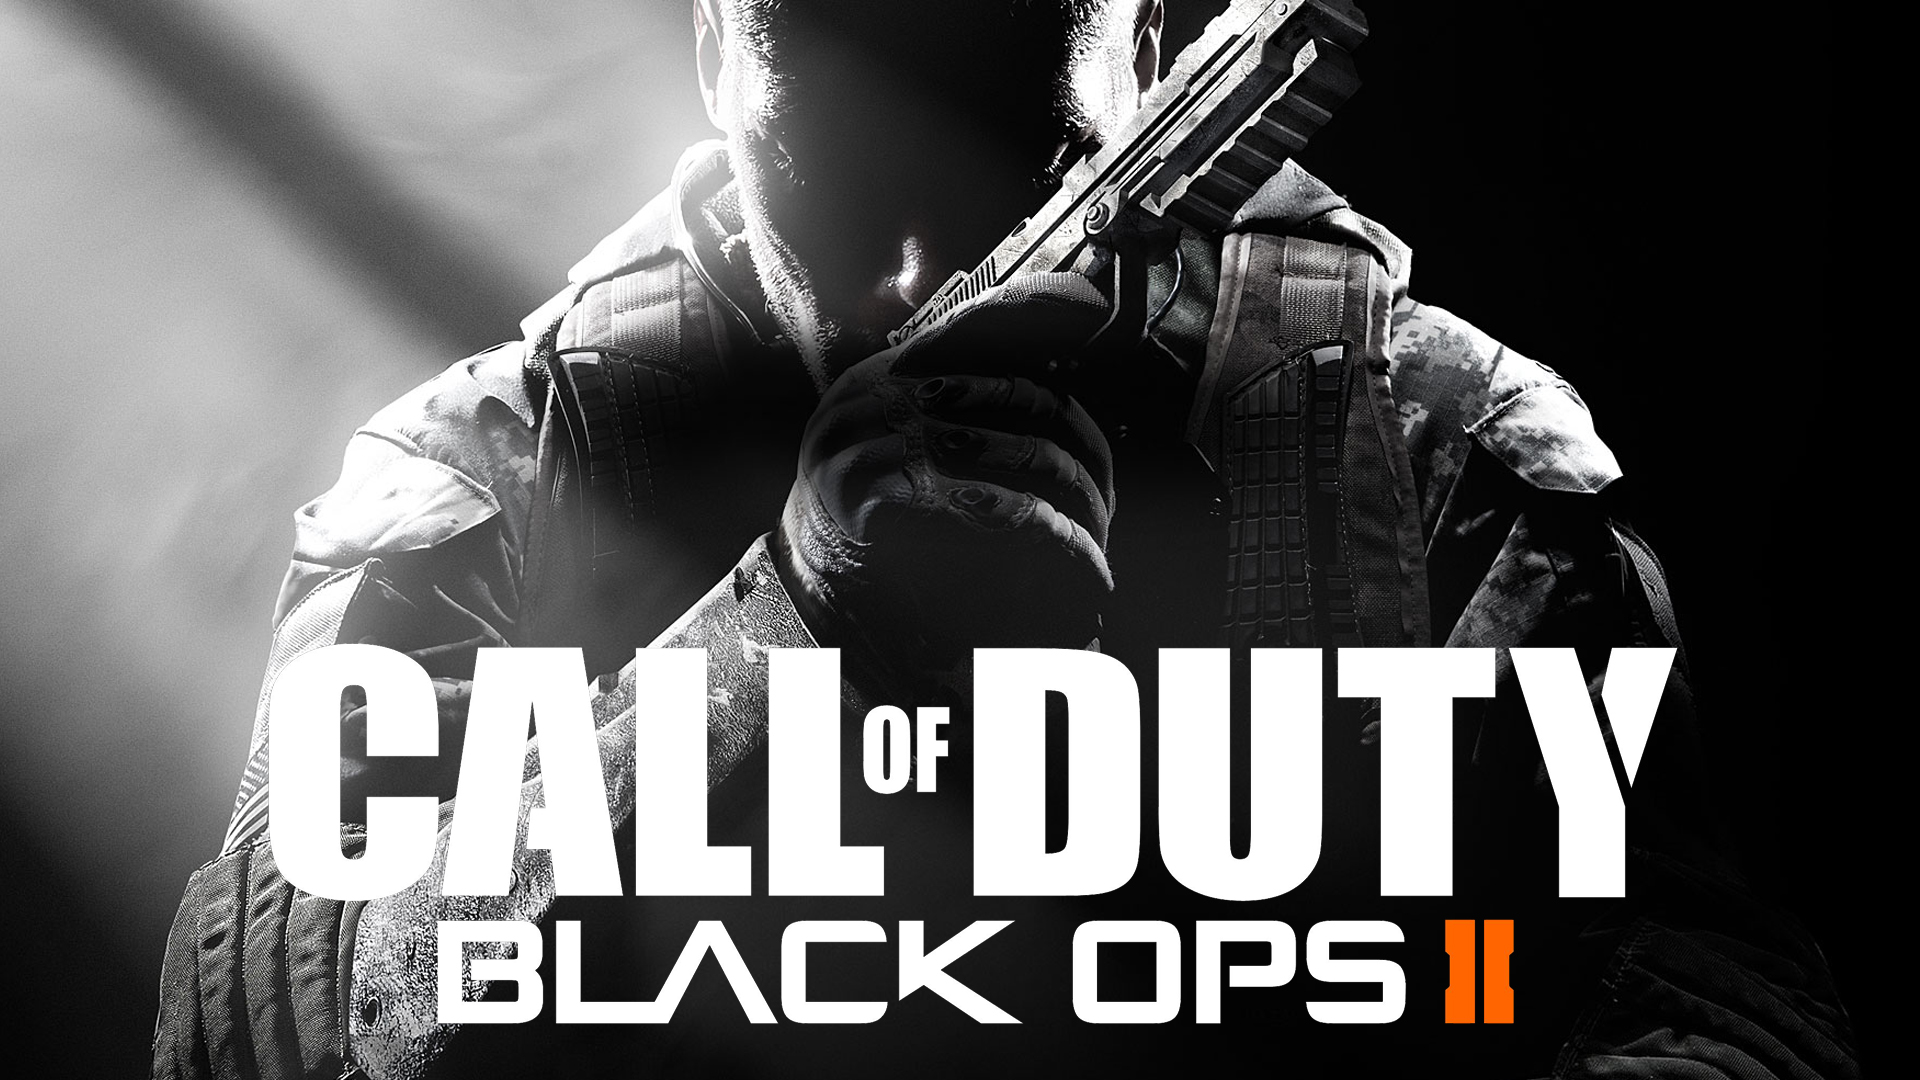 CALL OF DUTY BLACK OPS 2 - PS4